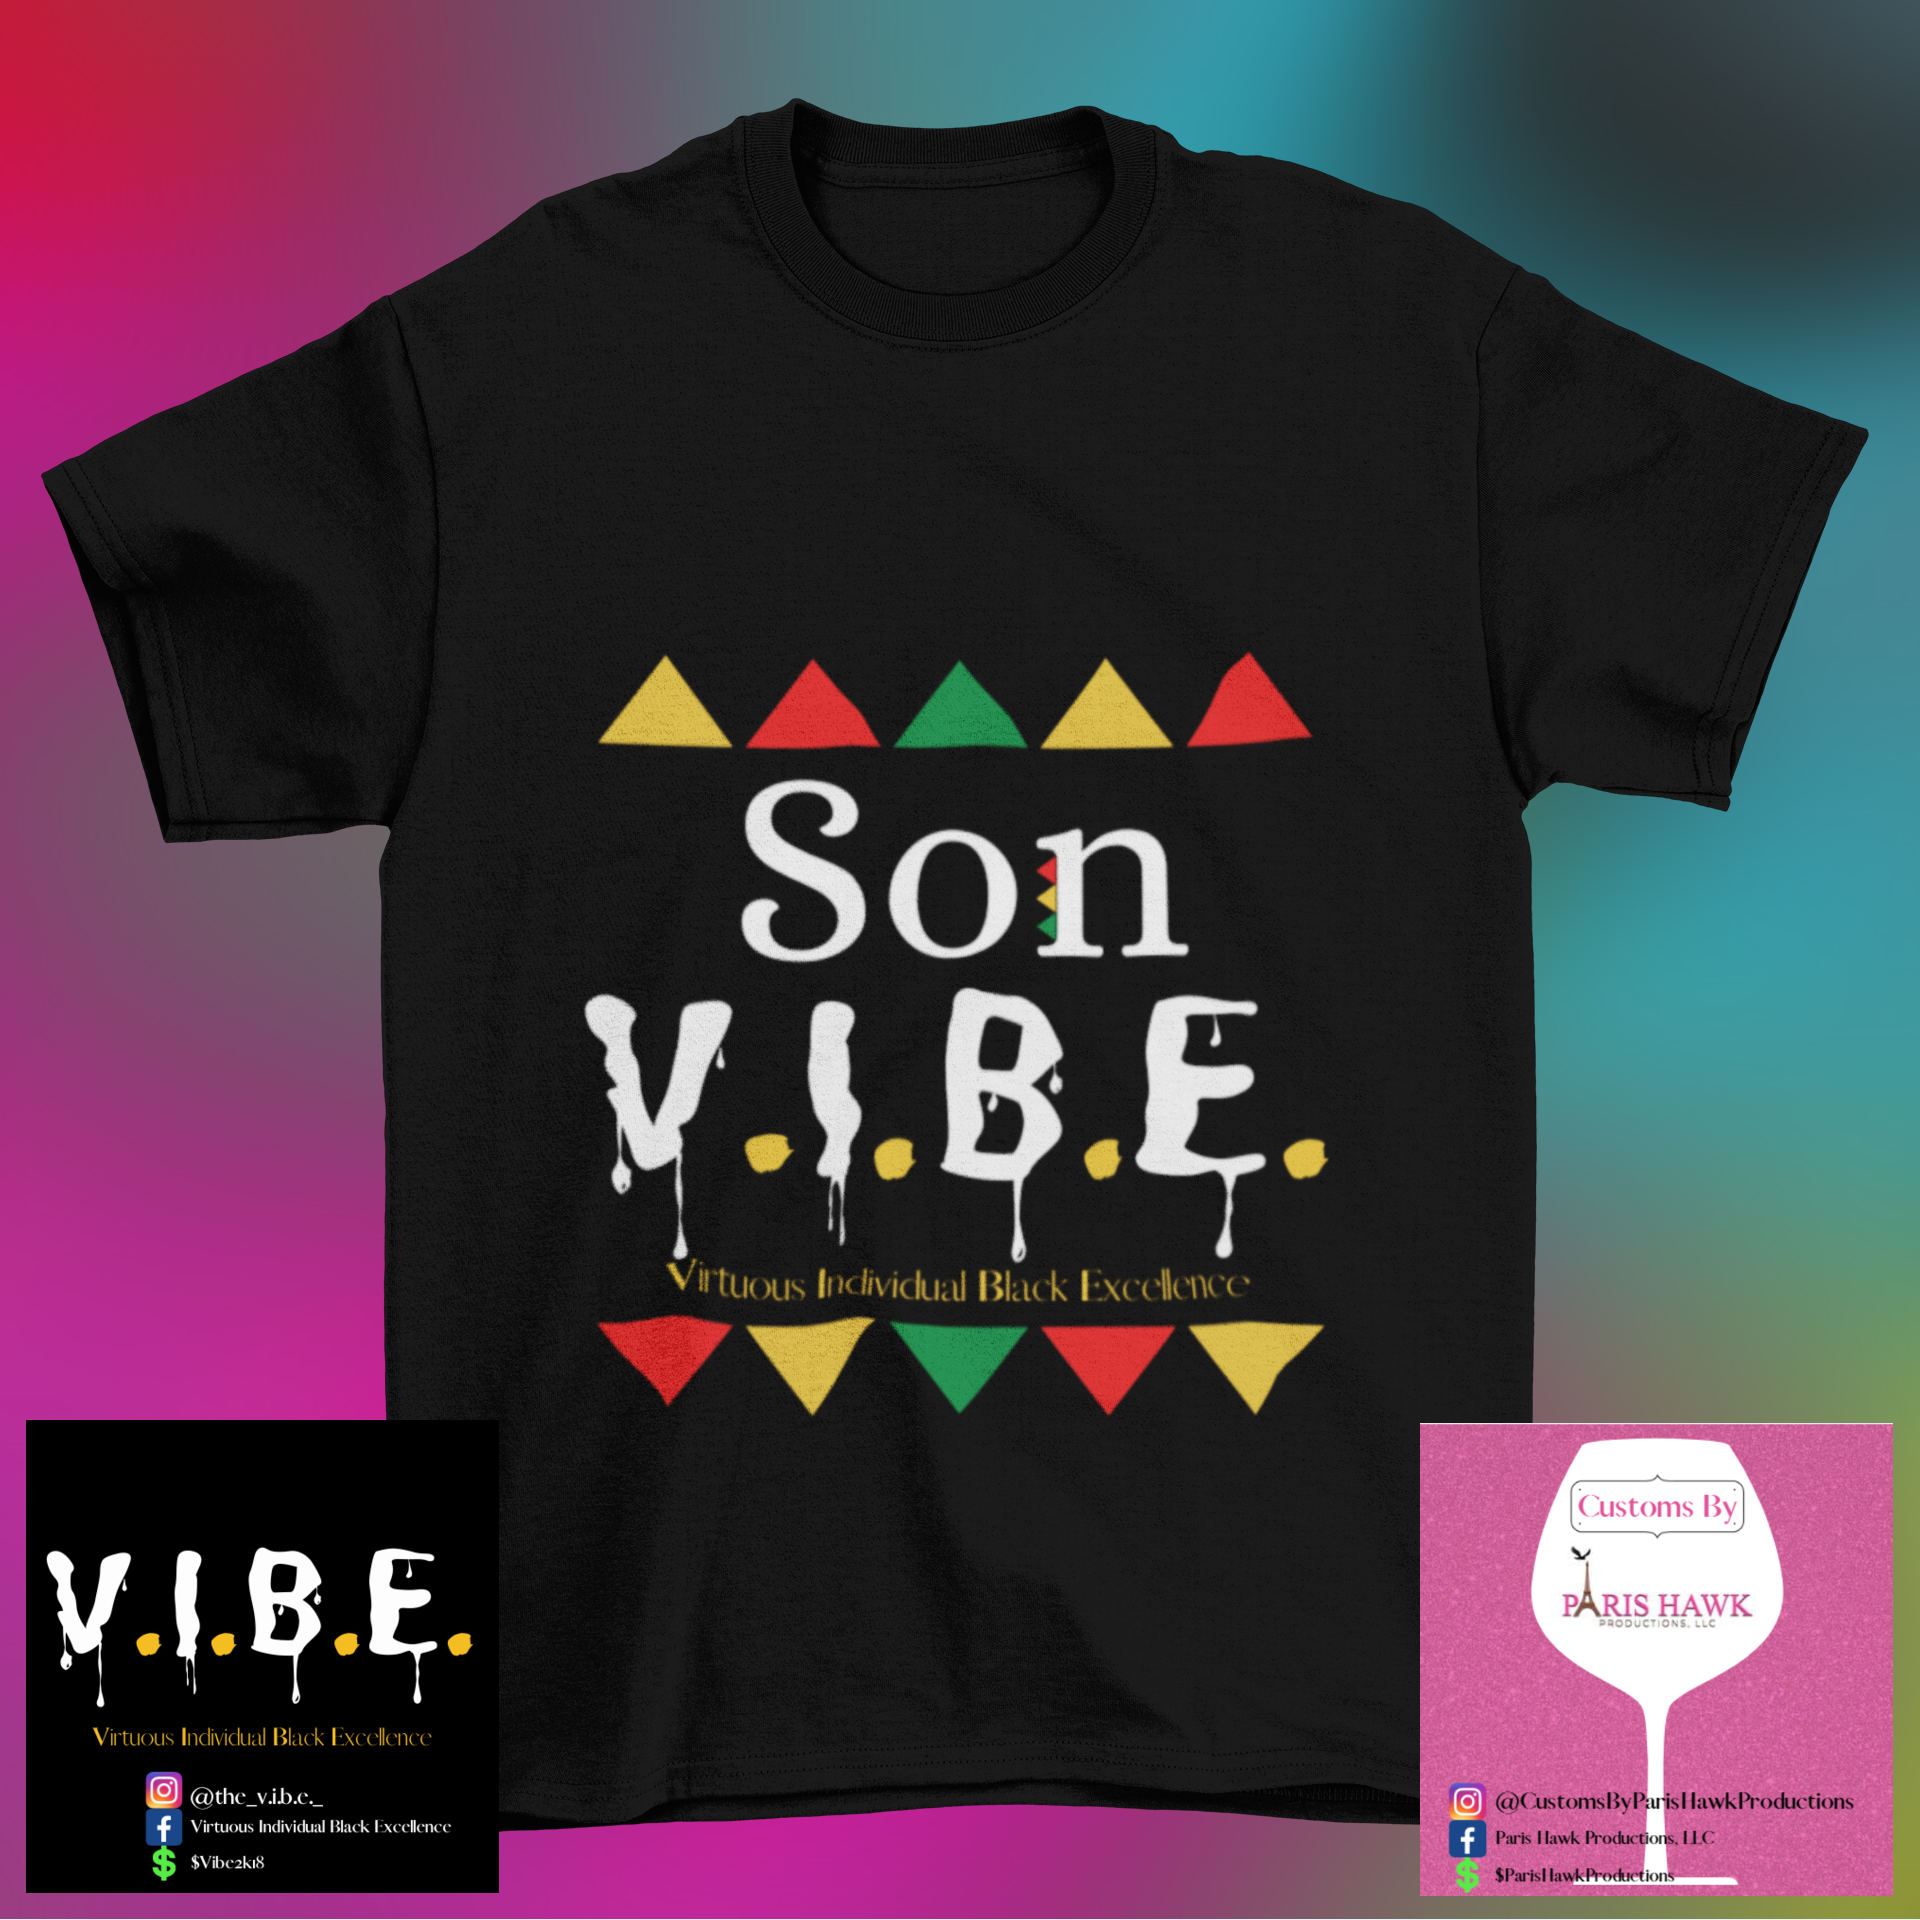 Family VIBE (Virtuous Individual Black Excellence)